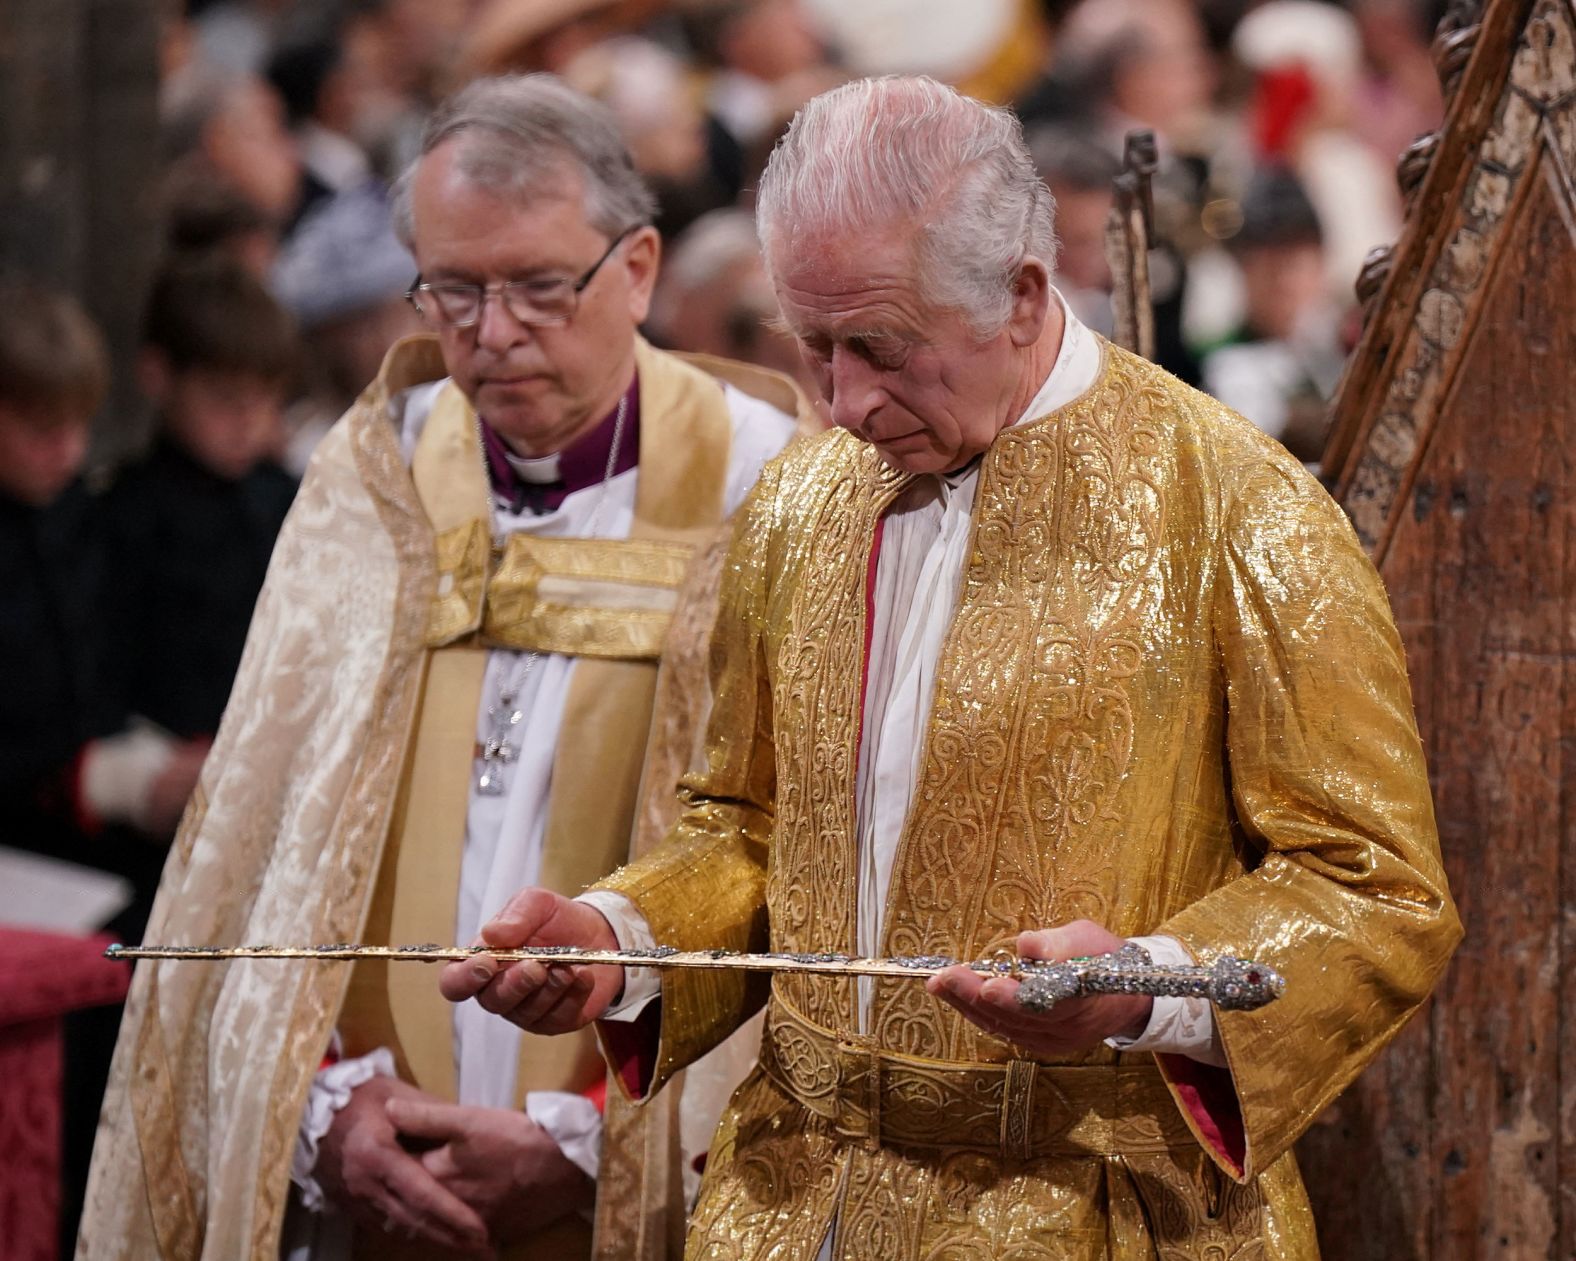 The King holds a sword during the ceremony.